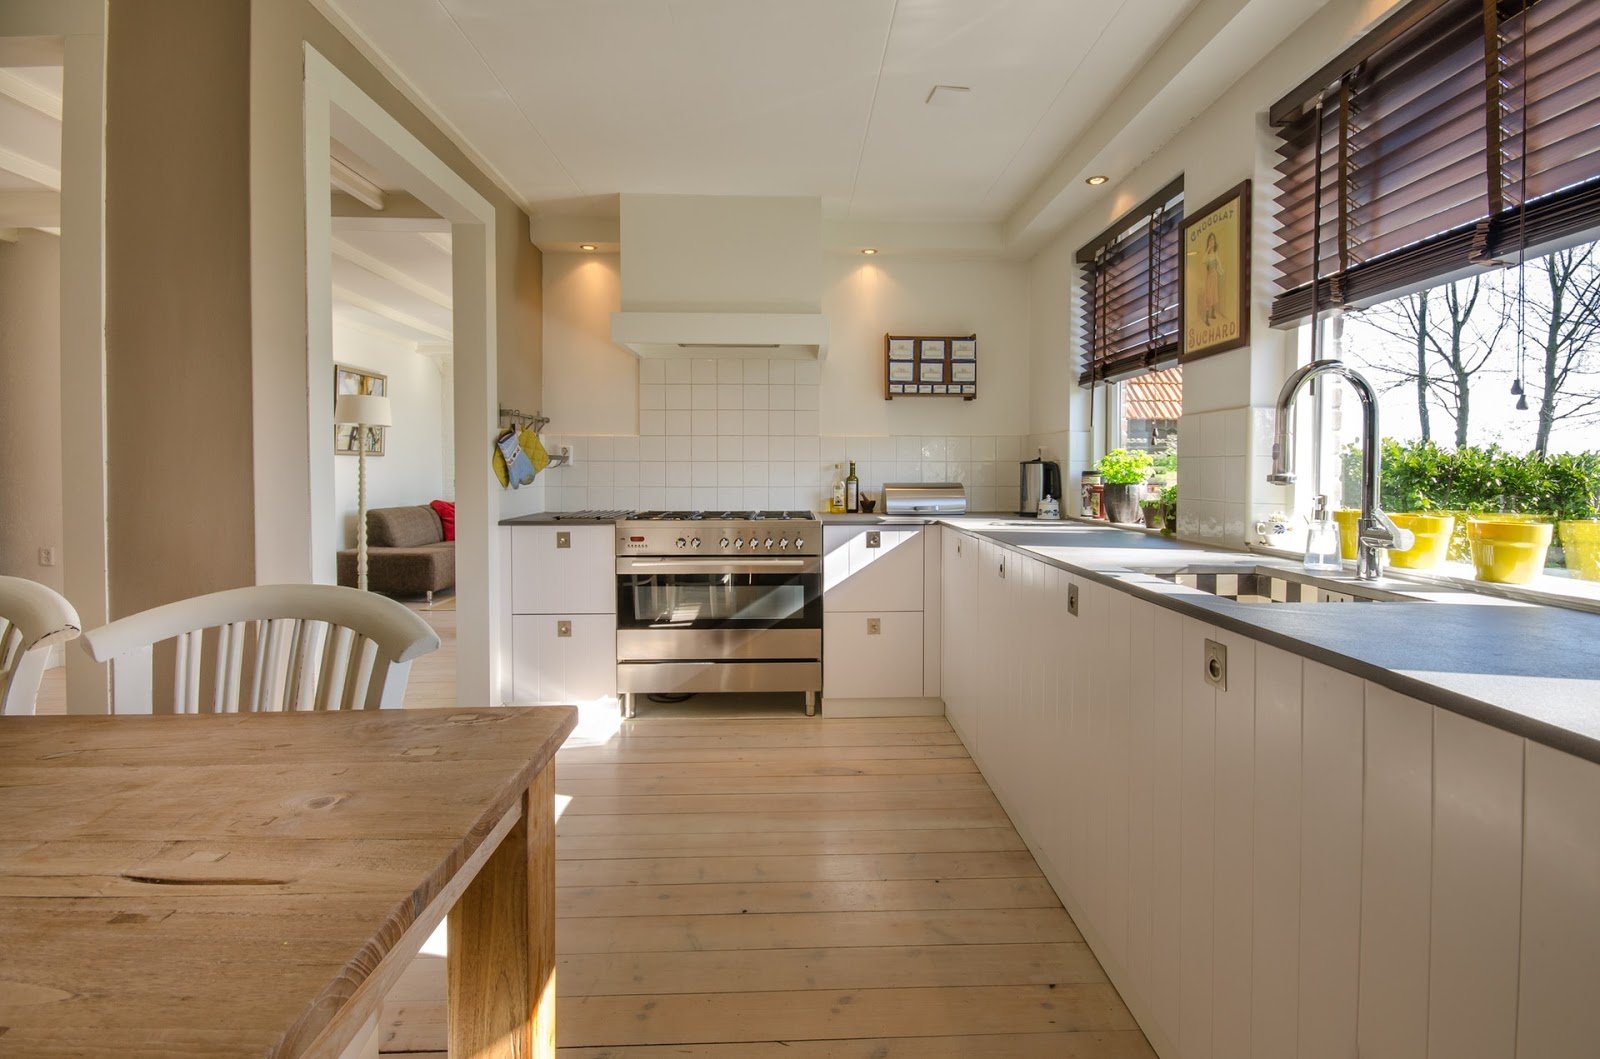 increase your kitchen’s value